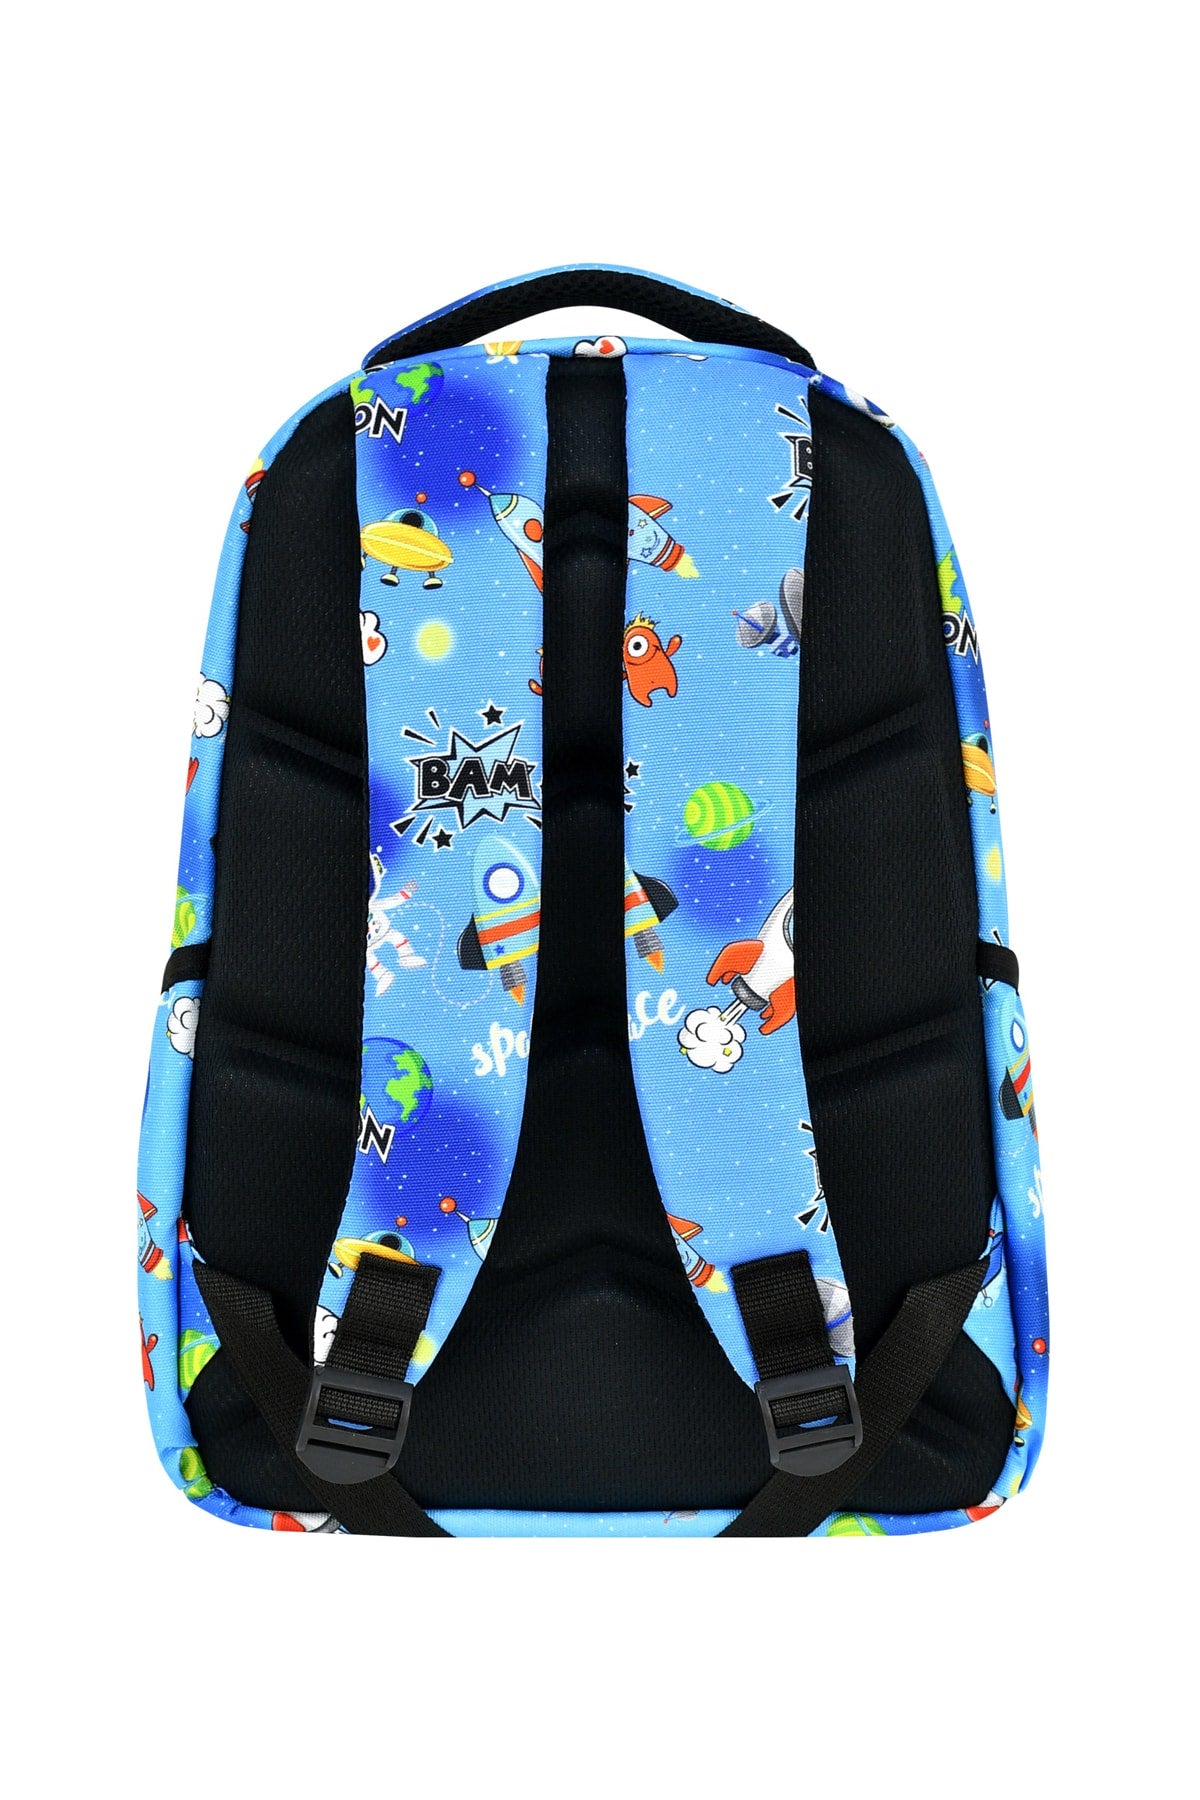 3-pack Elementary School Astronaut Patterned School Bag with Food and Pencil Holder for Boys